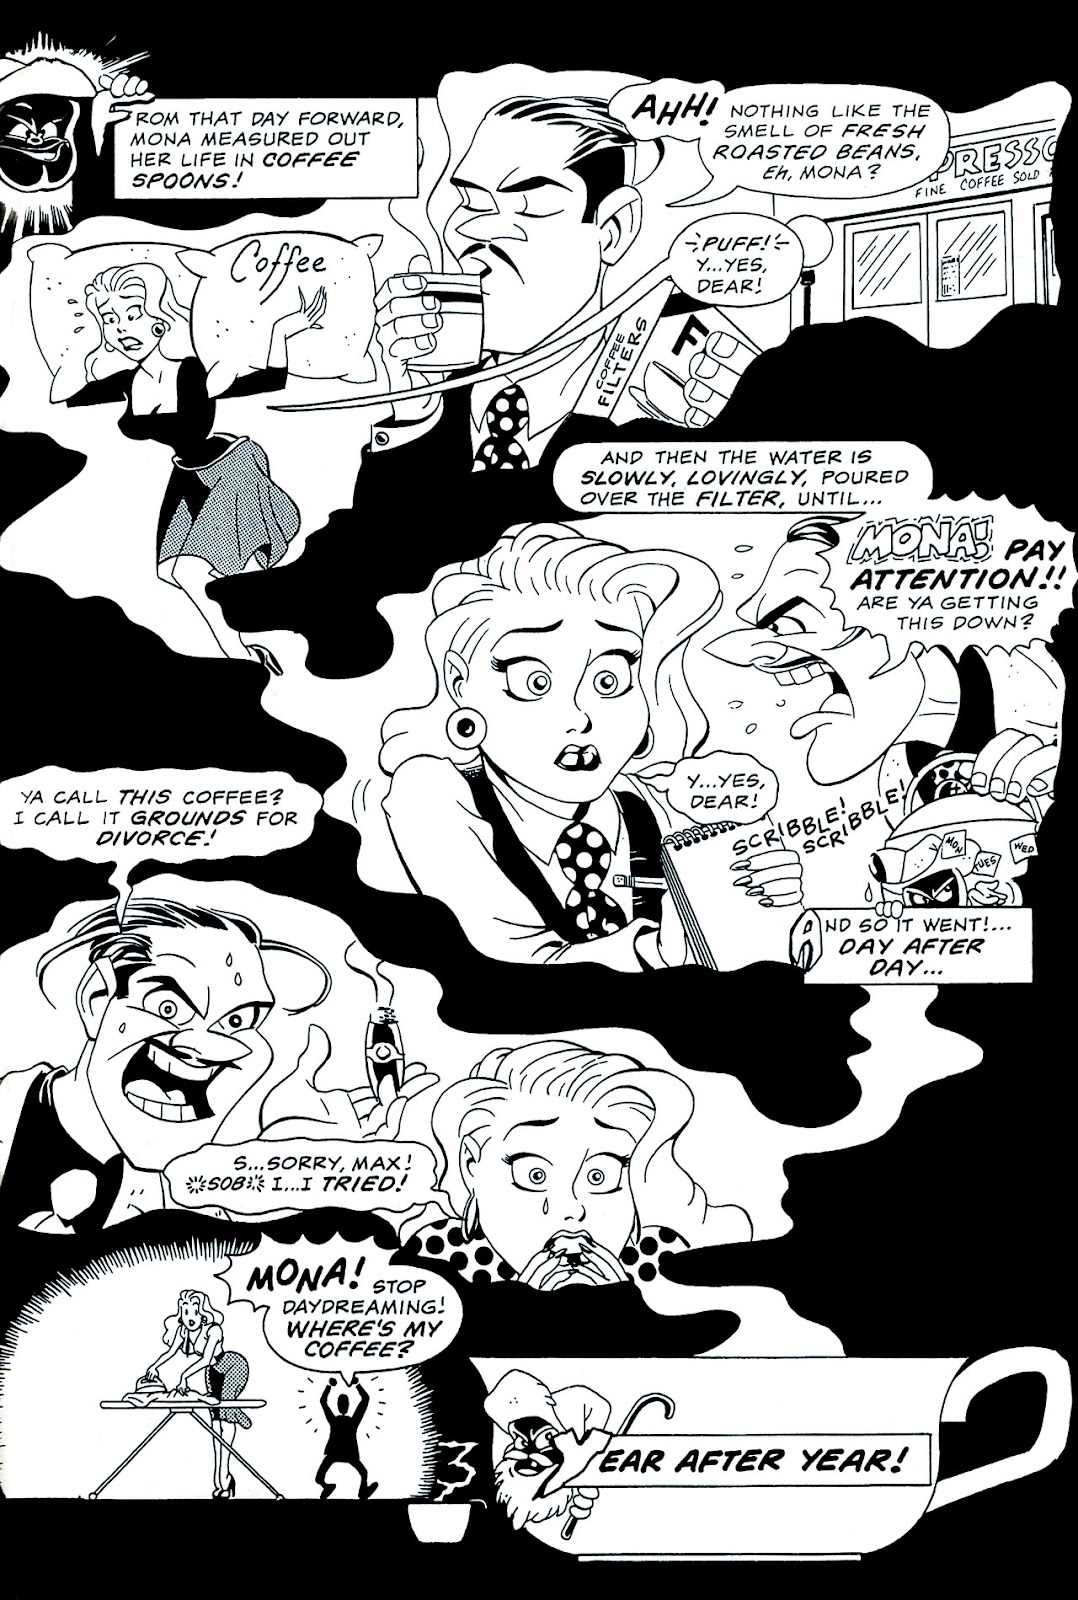 Mr. Monster Presents: (crack-a-boom) issue 3 - Page 29